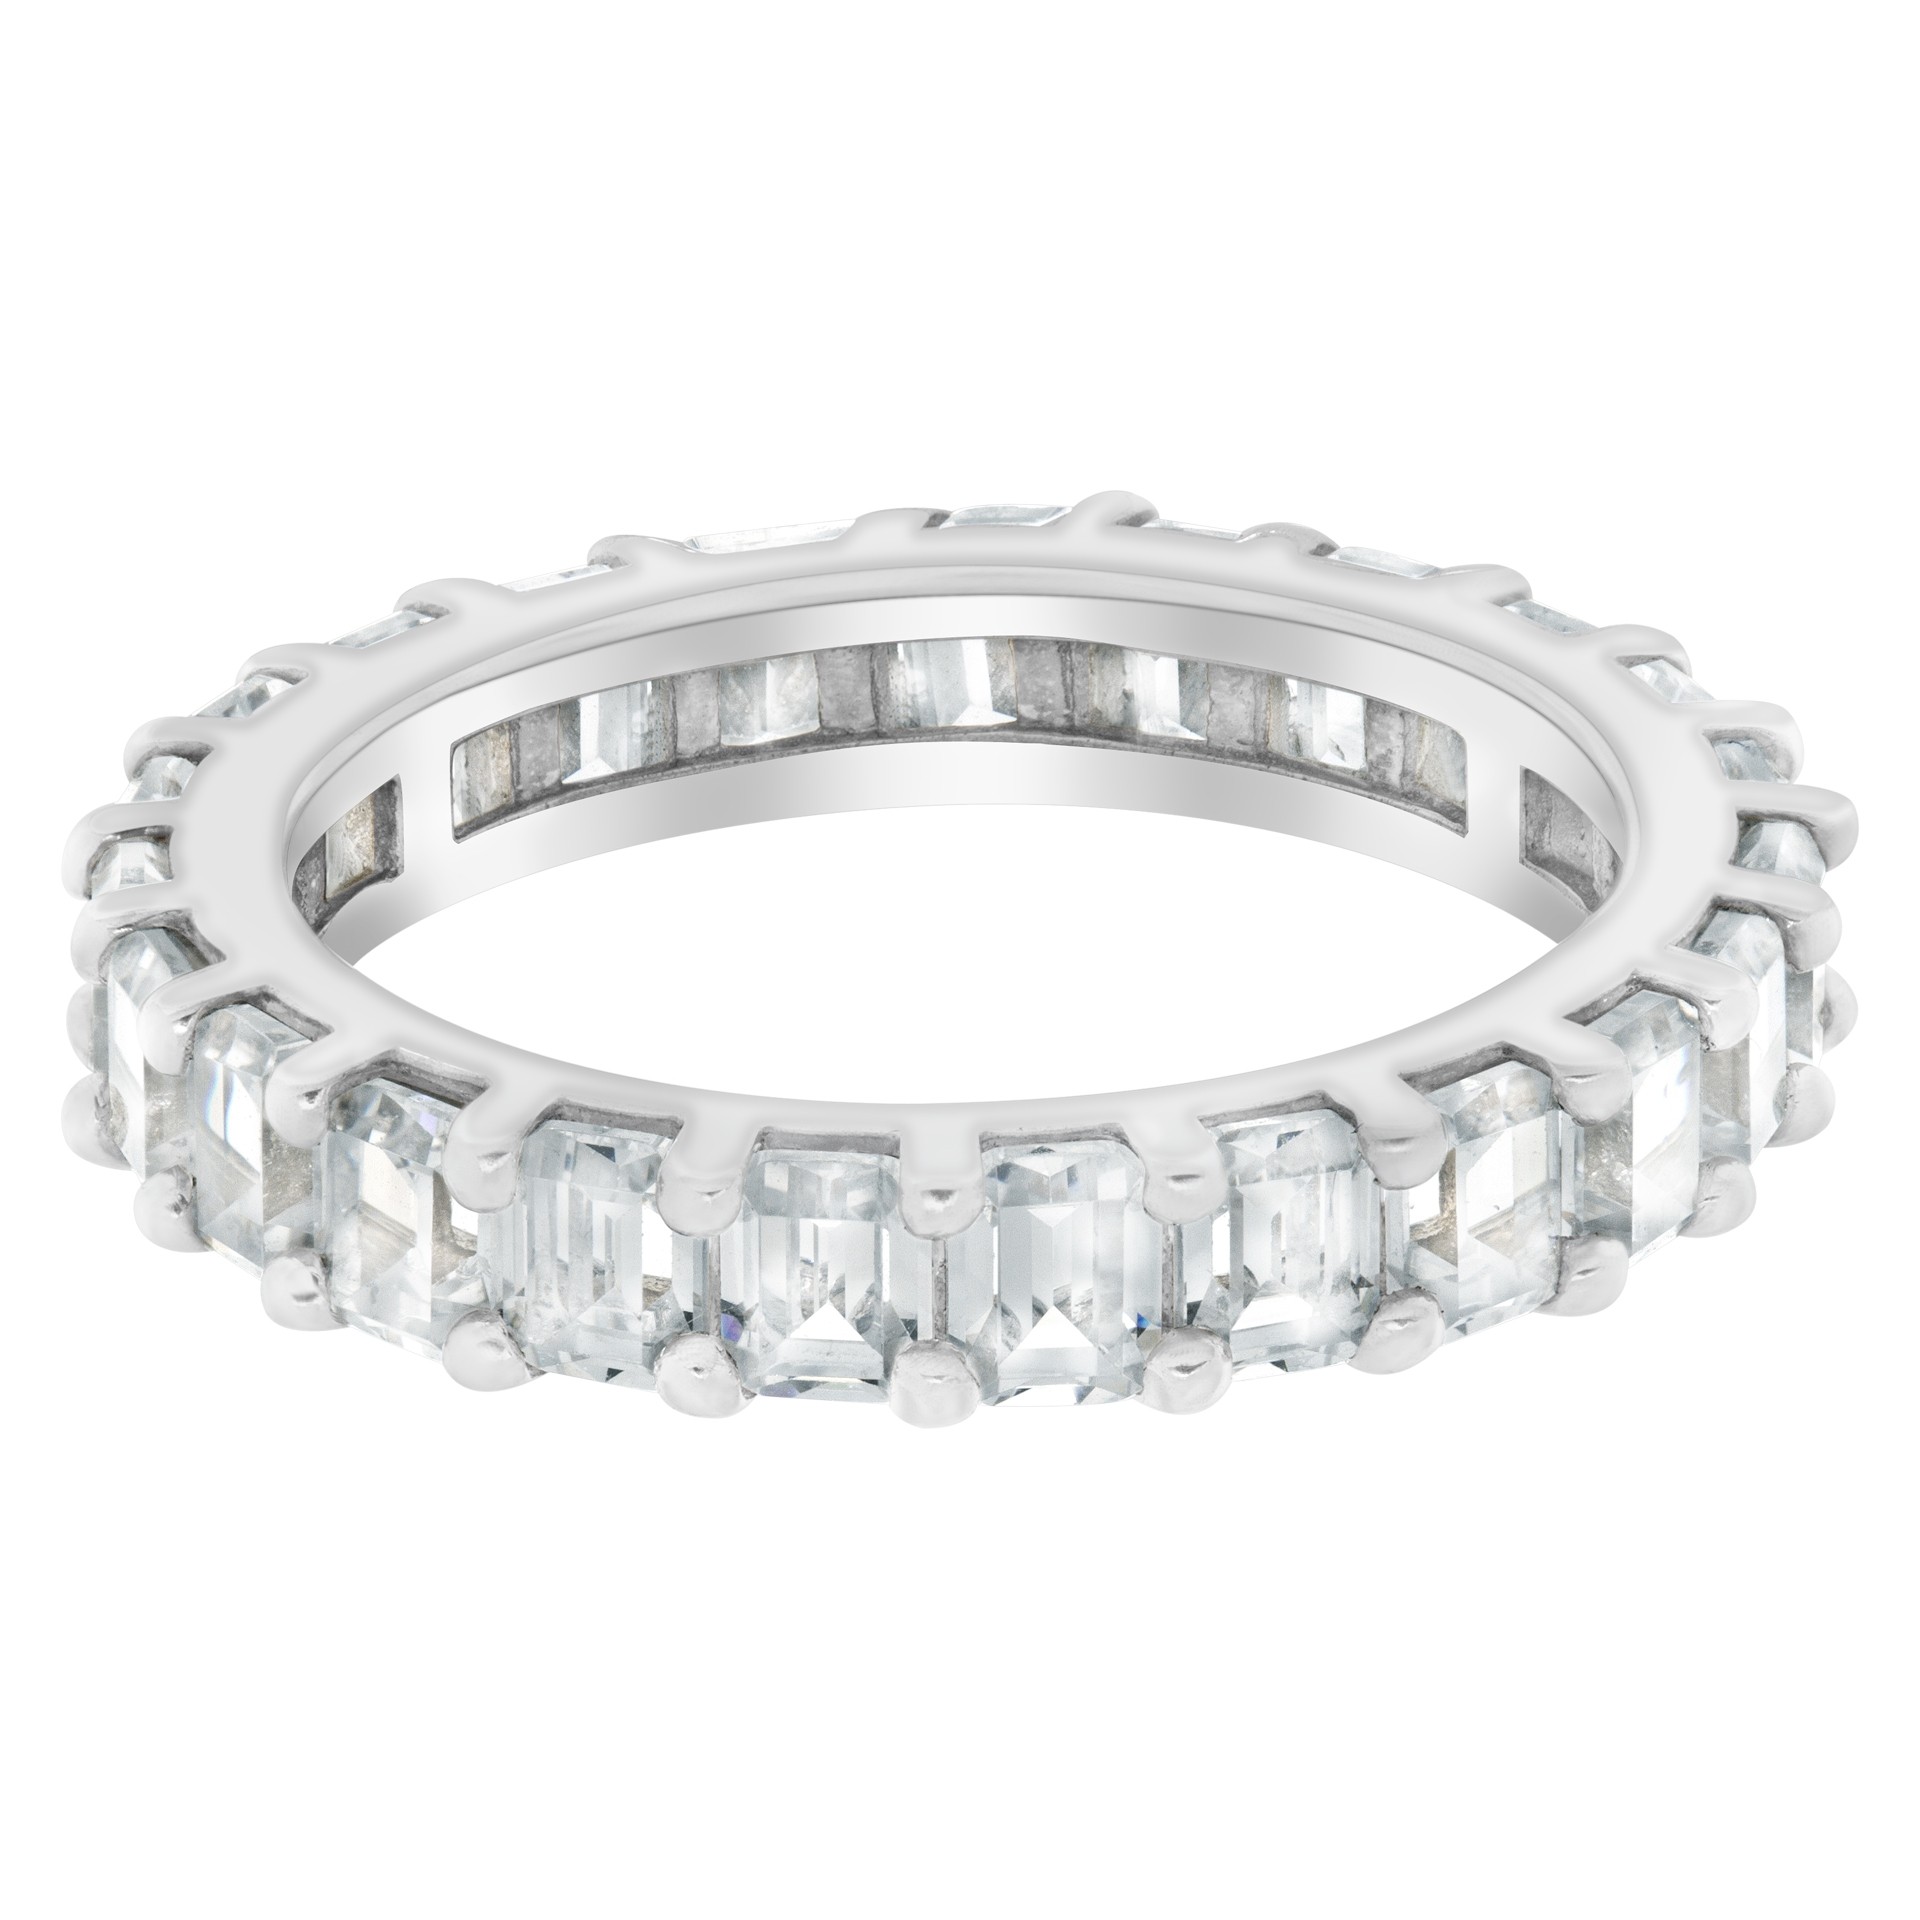 3.0ct Emerald Cut Diamond eternity band or ring in platinum image 1